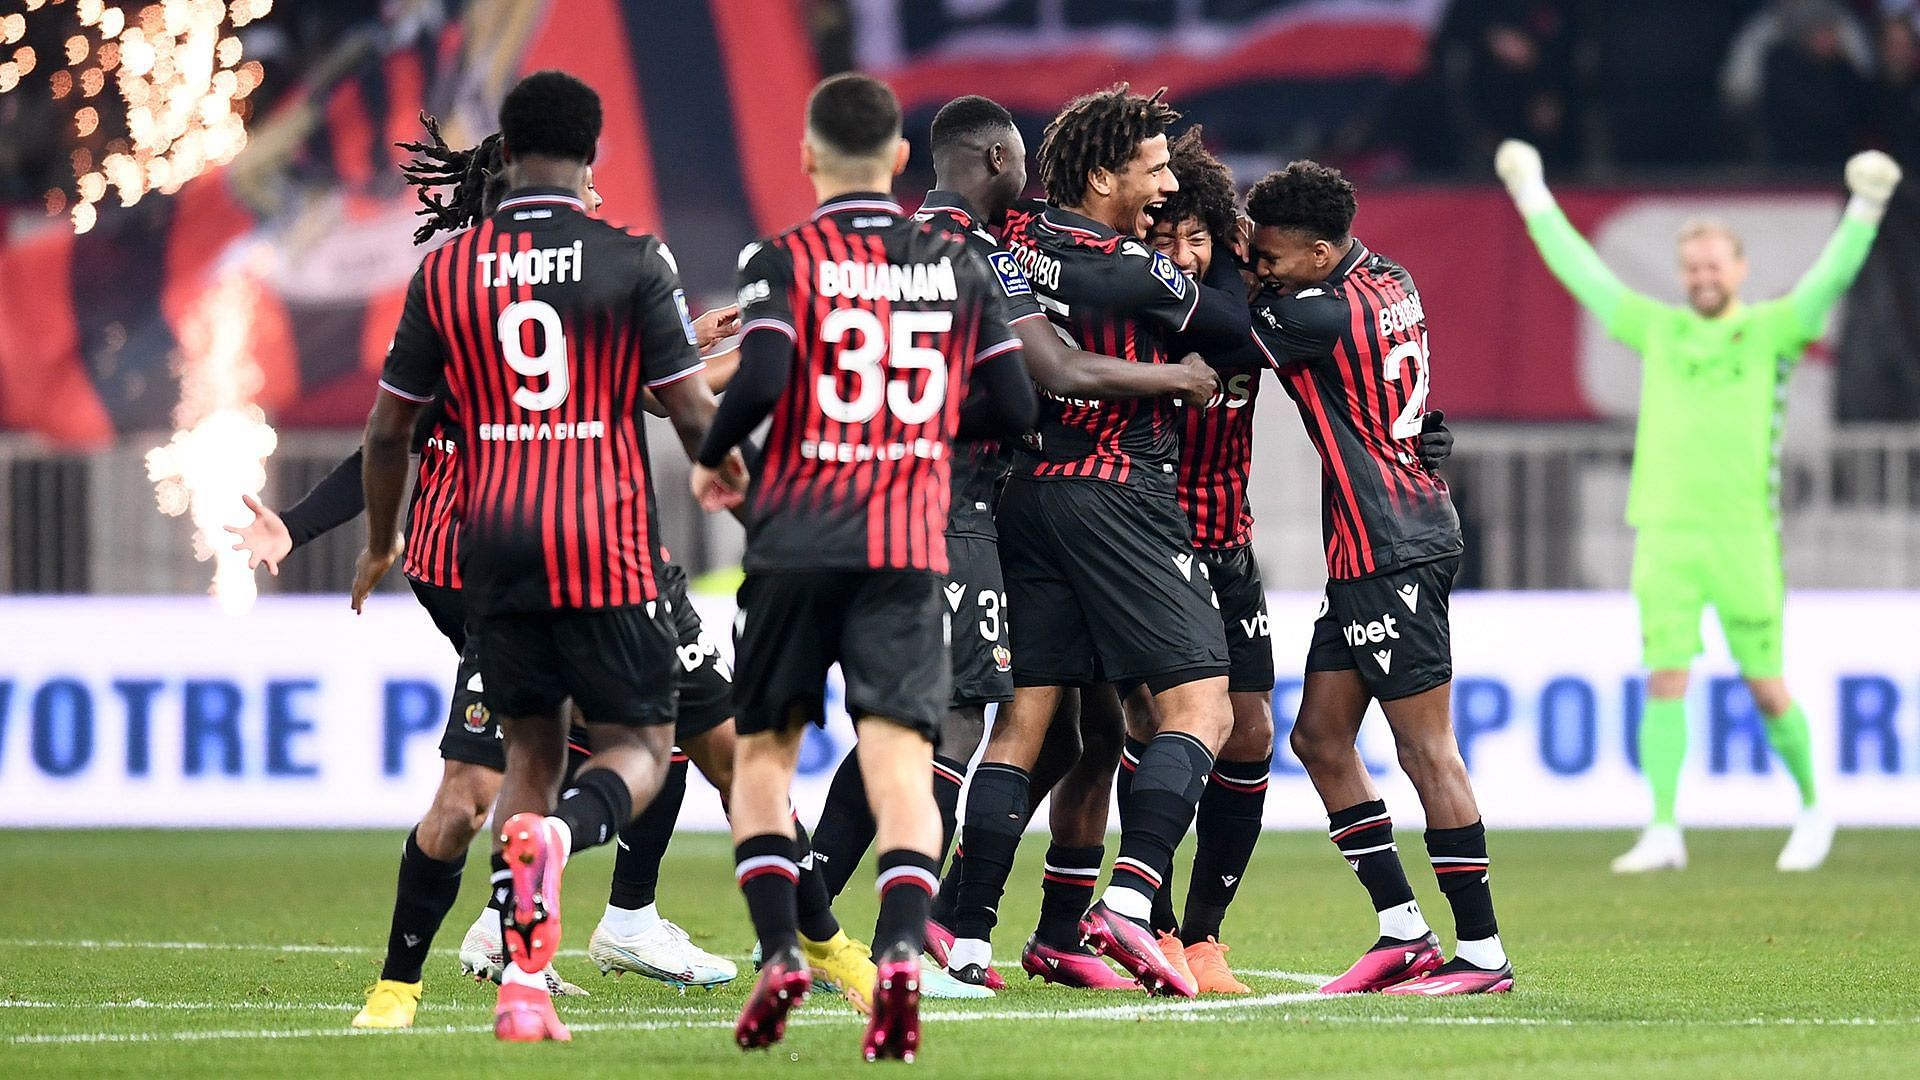 Will on-form Nice defeat Nantes this weekend?